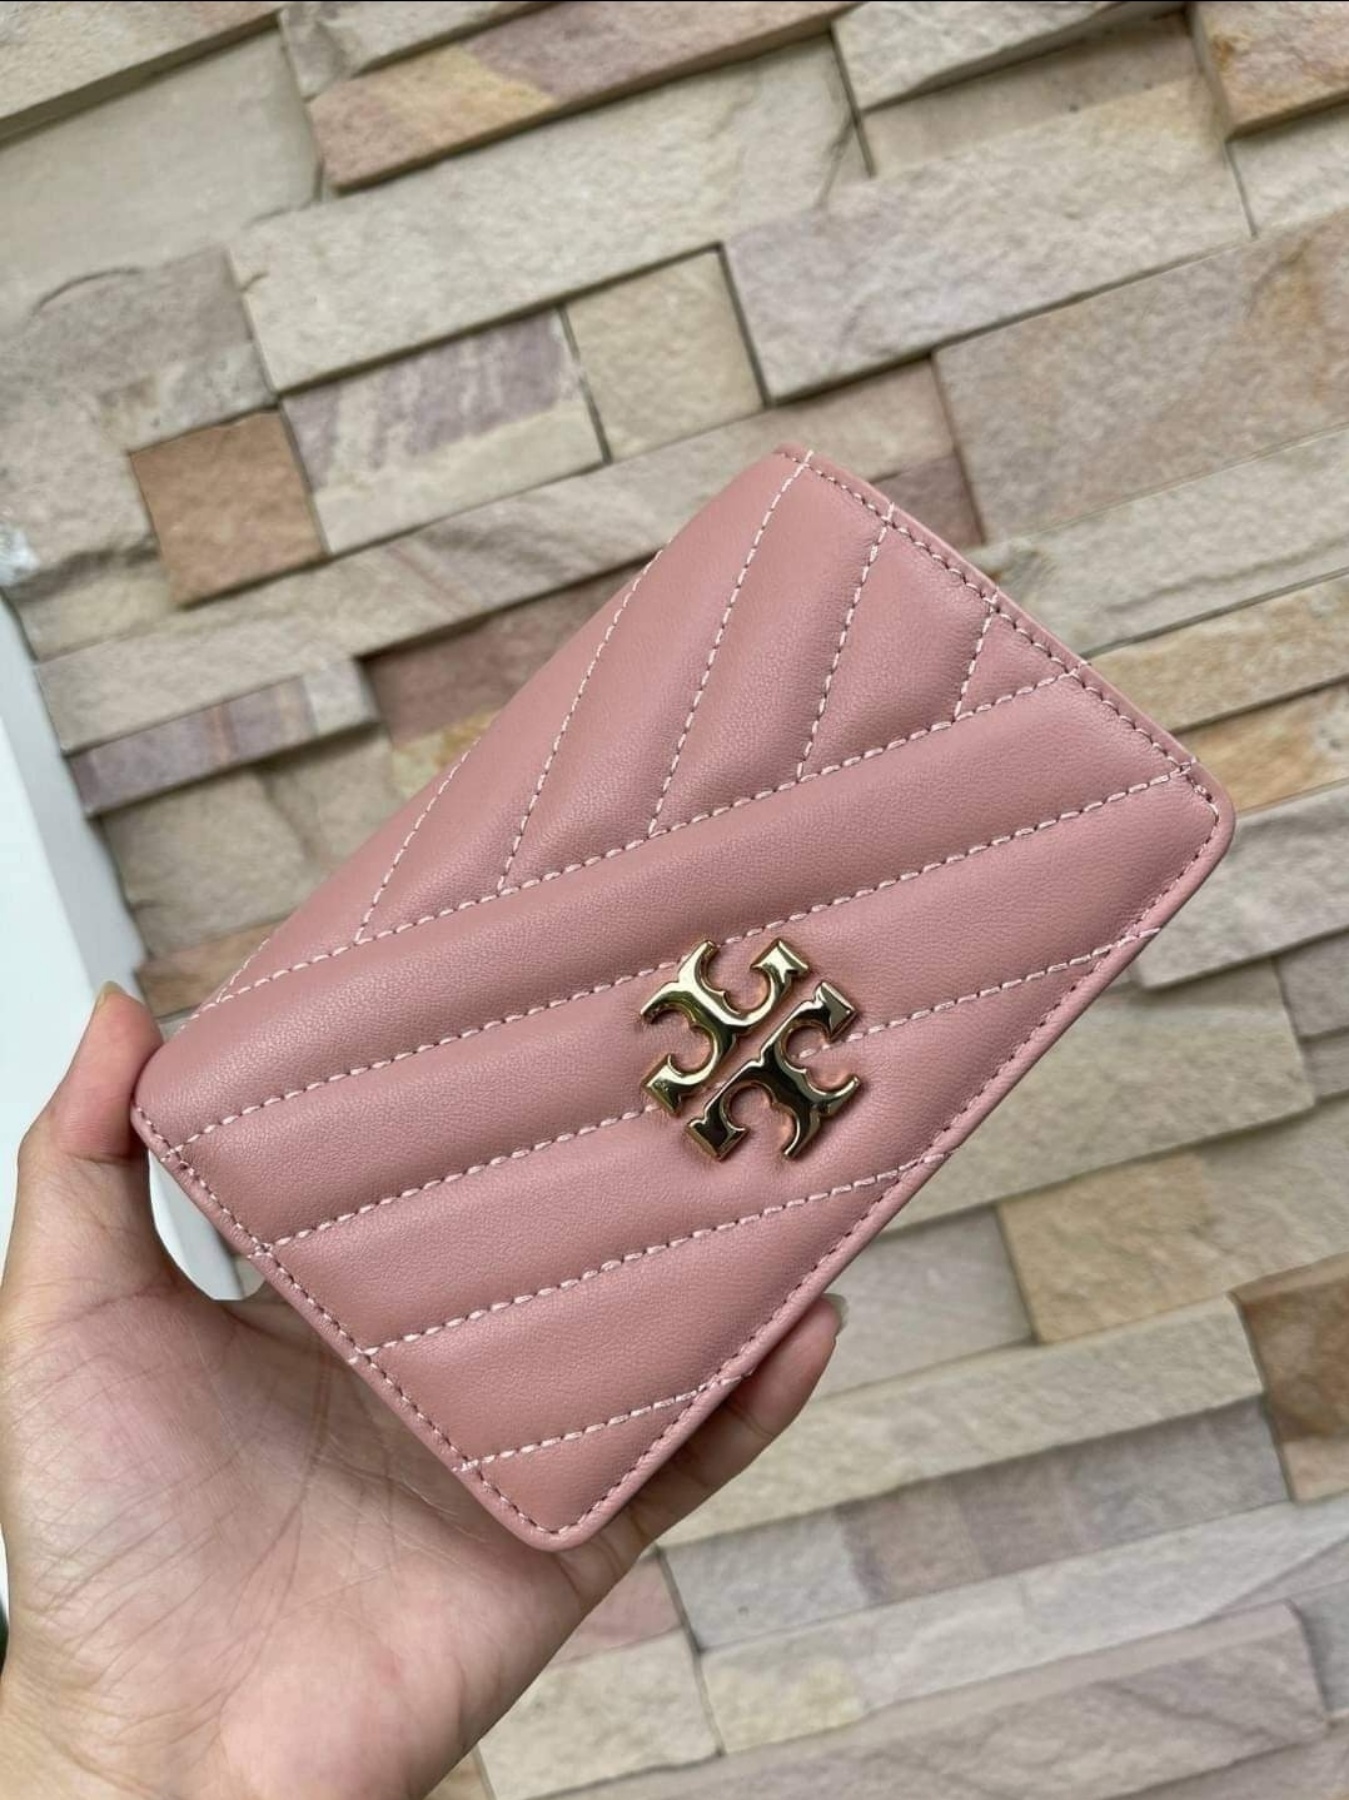 .Y . 56607 Kira Chevron Medium Slim Wallet in Pink Moon Soft  Quilted Leather with Pin-snap Closure - Women's Bi-Fold Wallet | Lazada PH